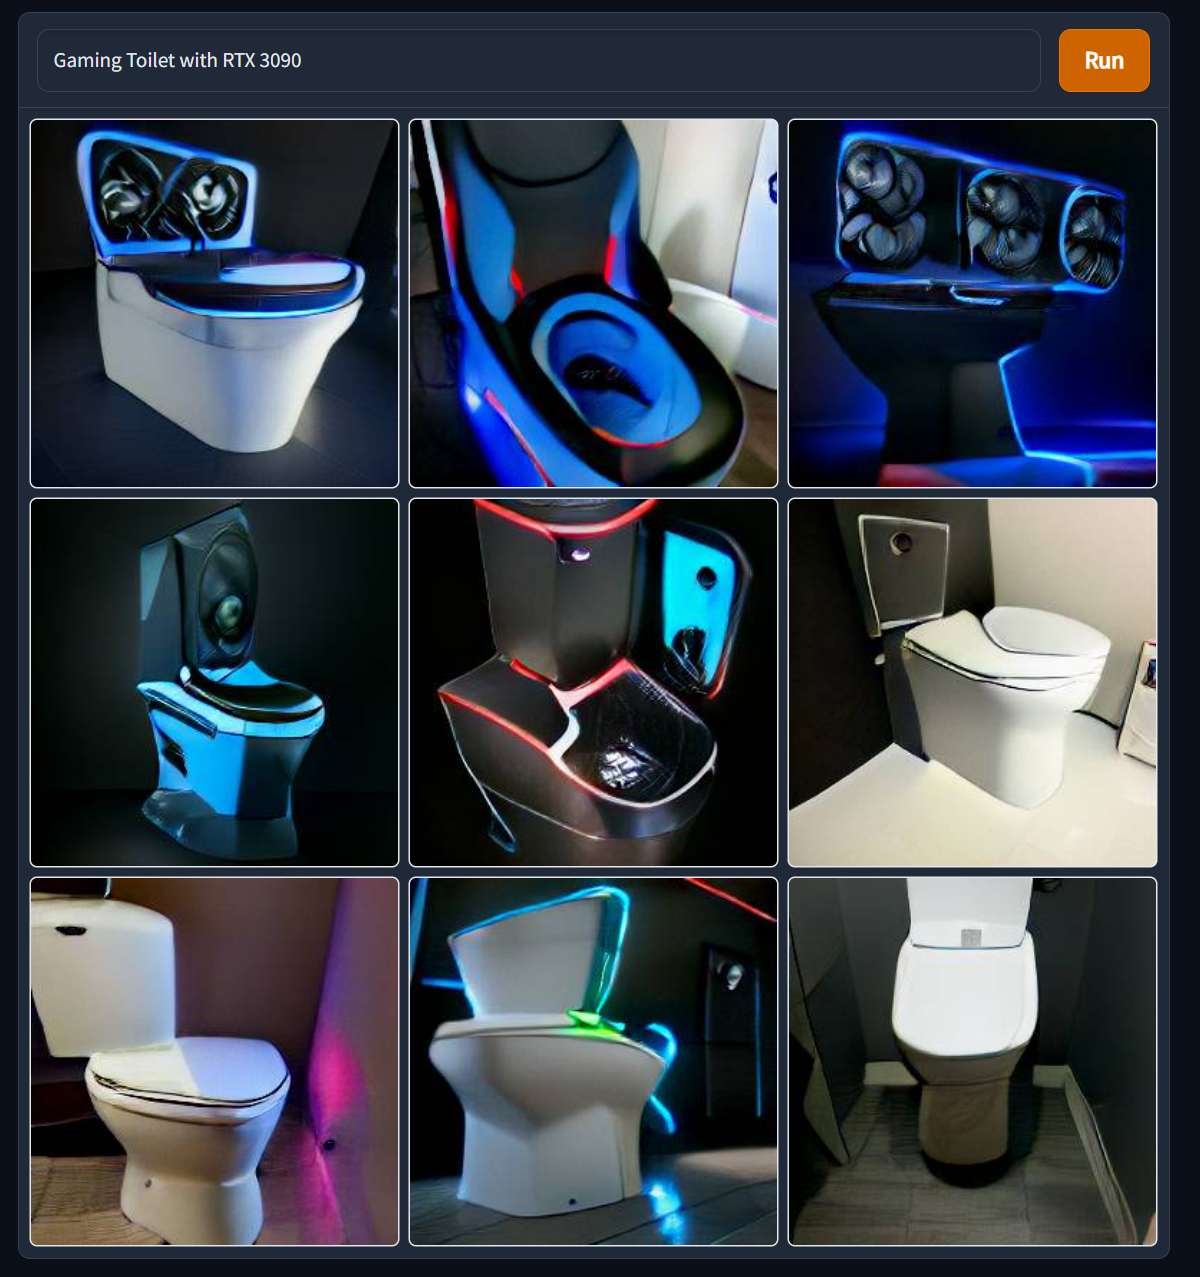 dalle_gaming_toilet.png